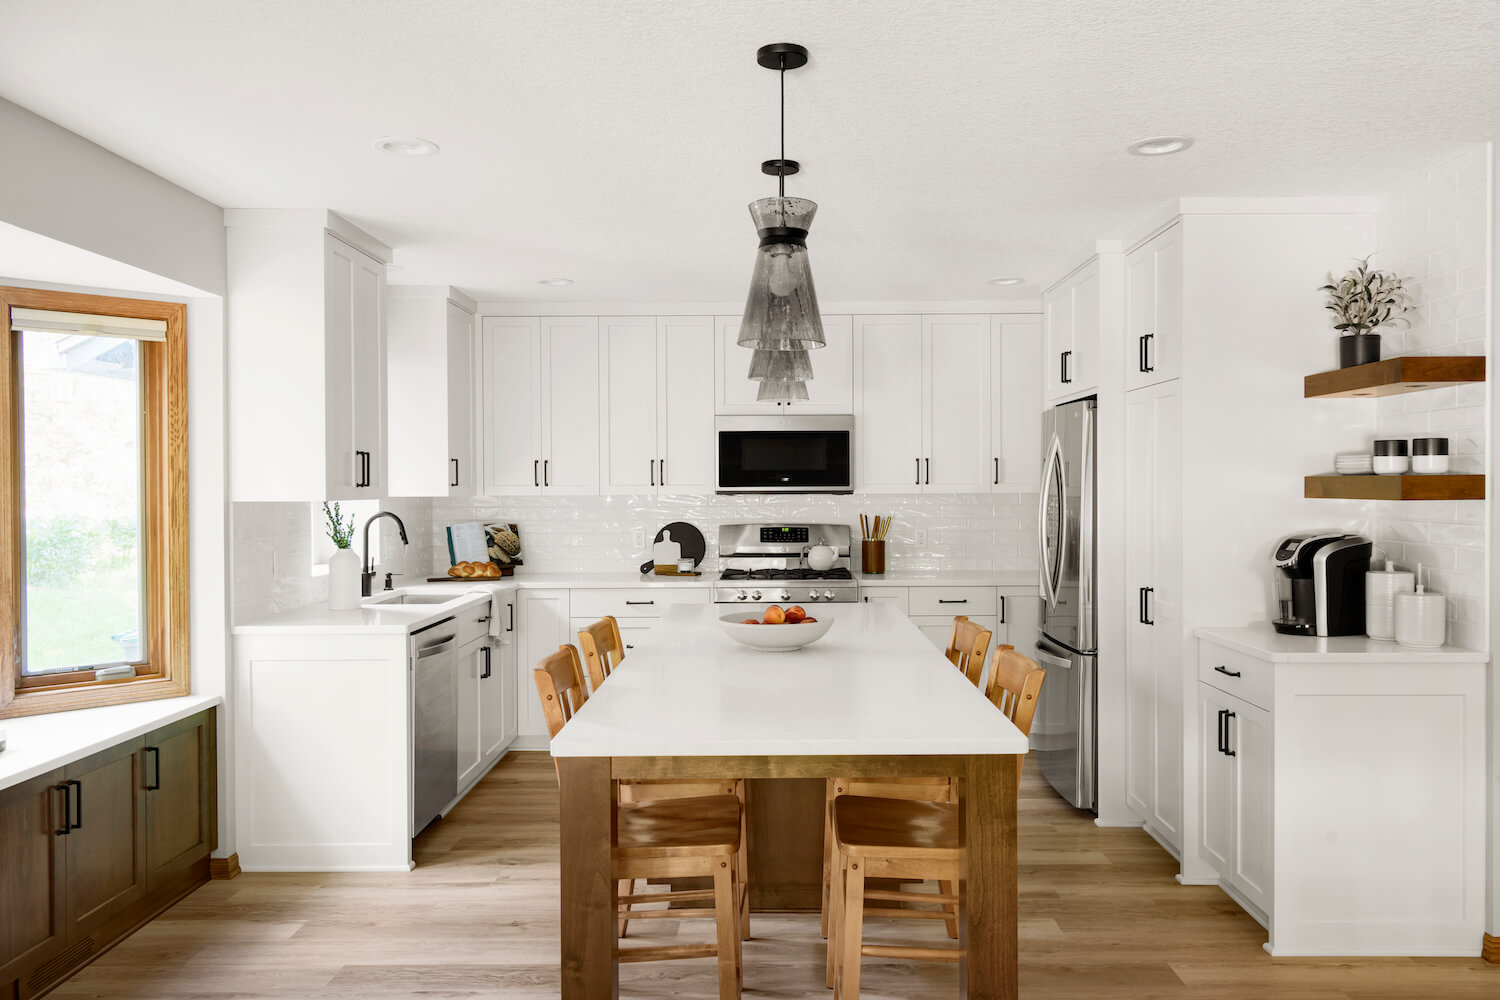 A remodeled kitchen with white cabinets and counters